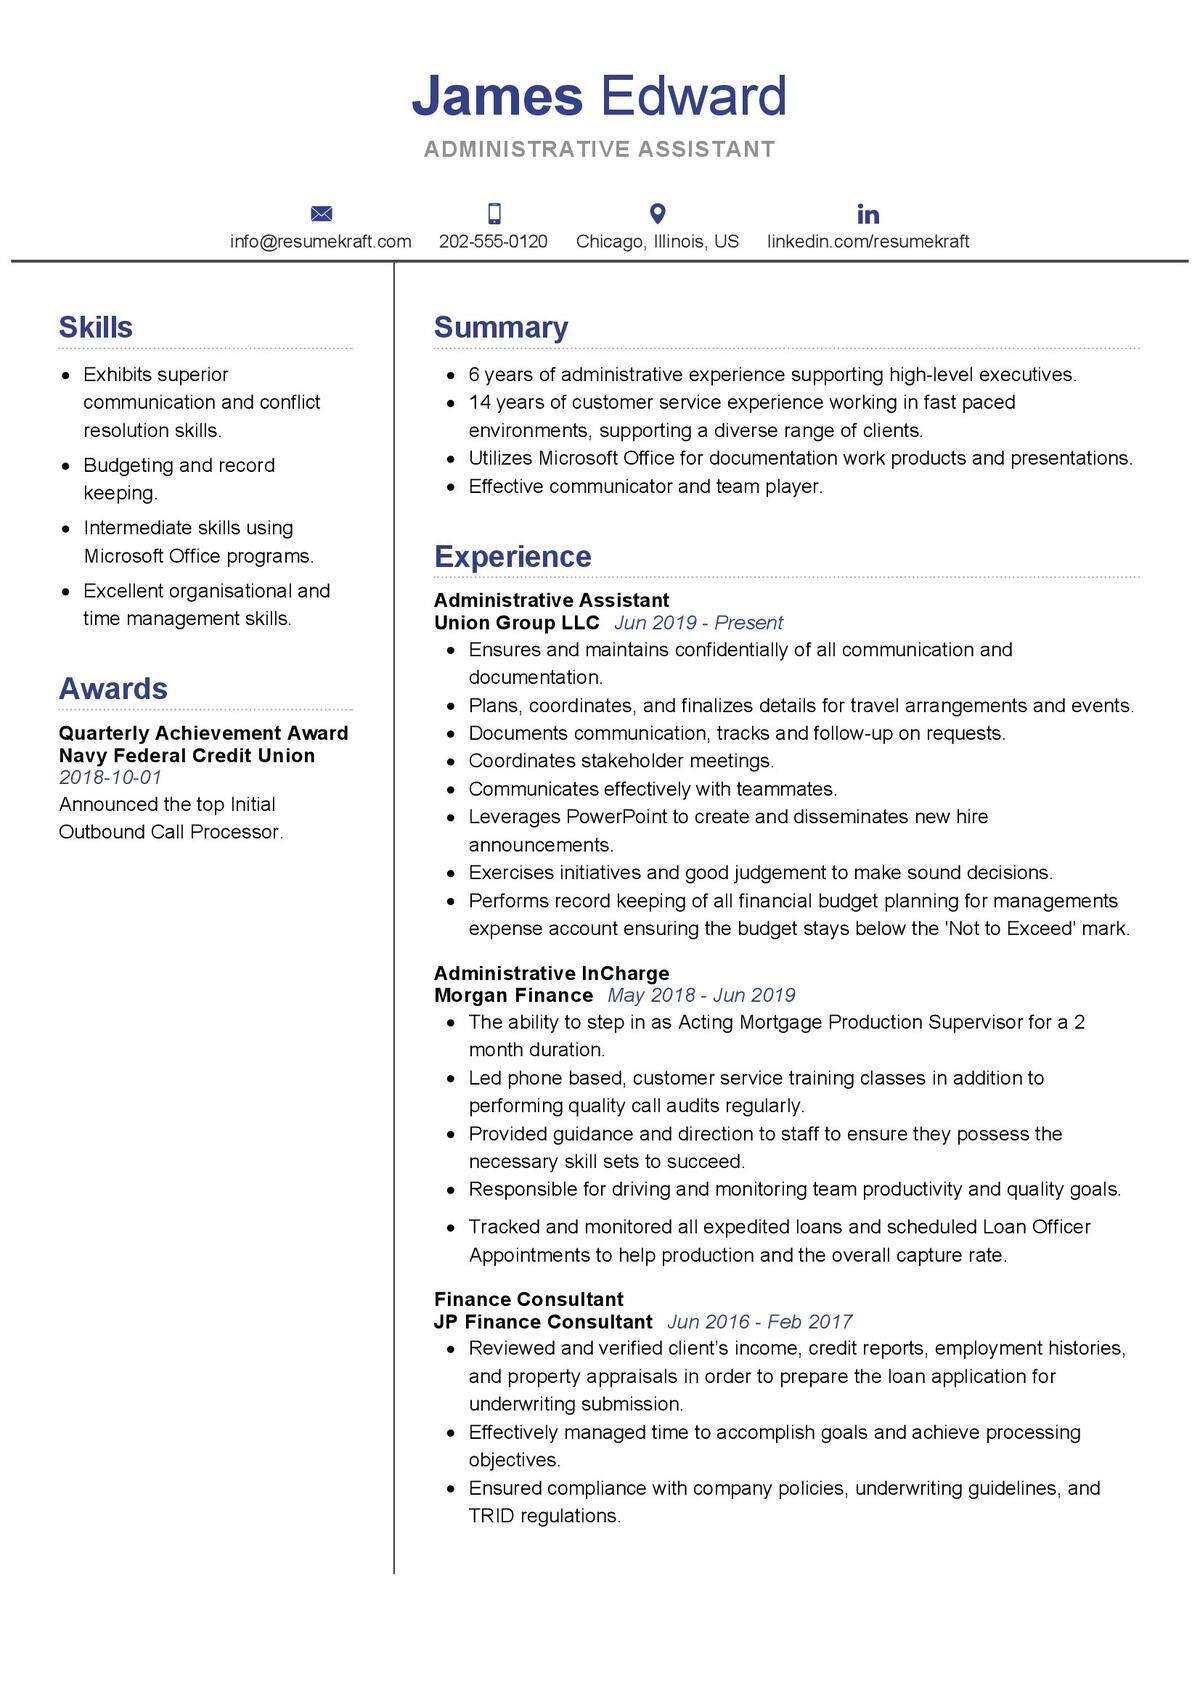 Sample Resume for Admin assistant Job Administrative assistant Resume Sample 2021 Writing Guide …